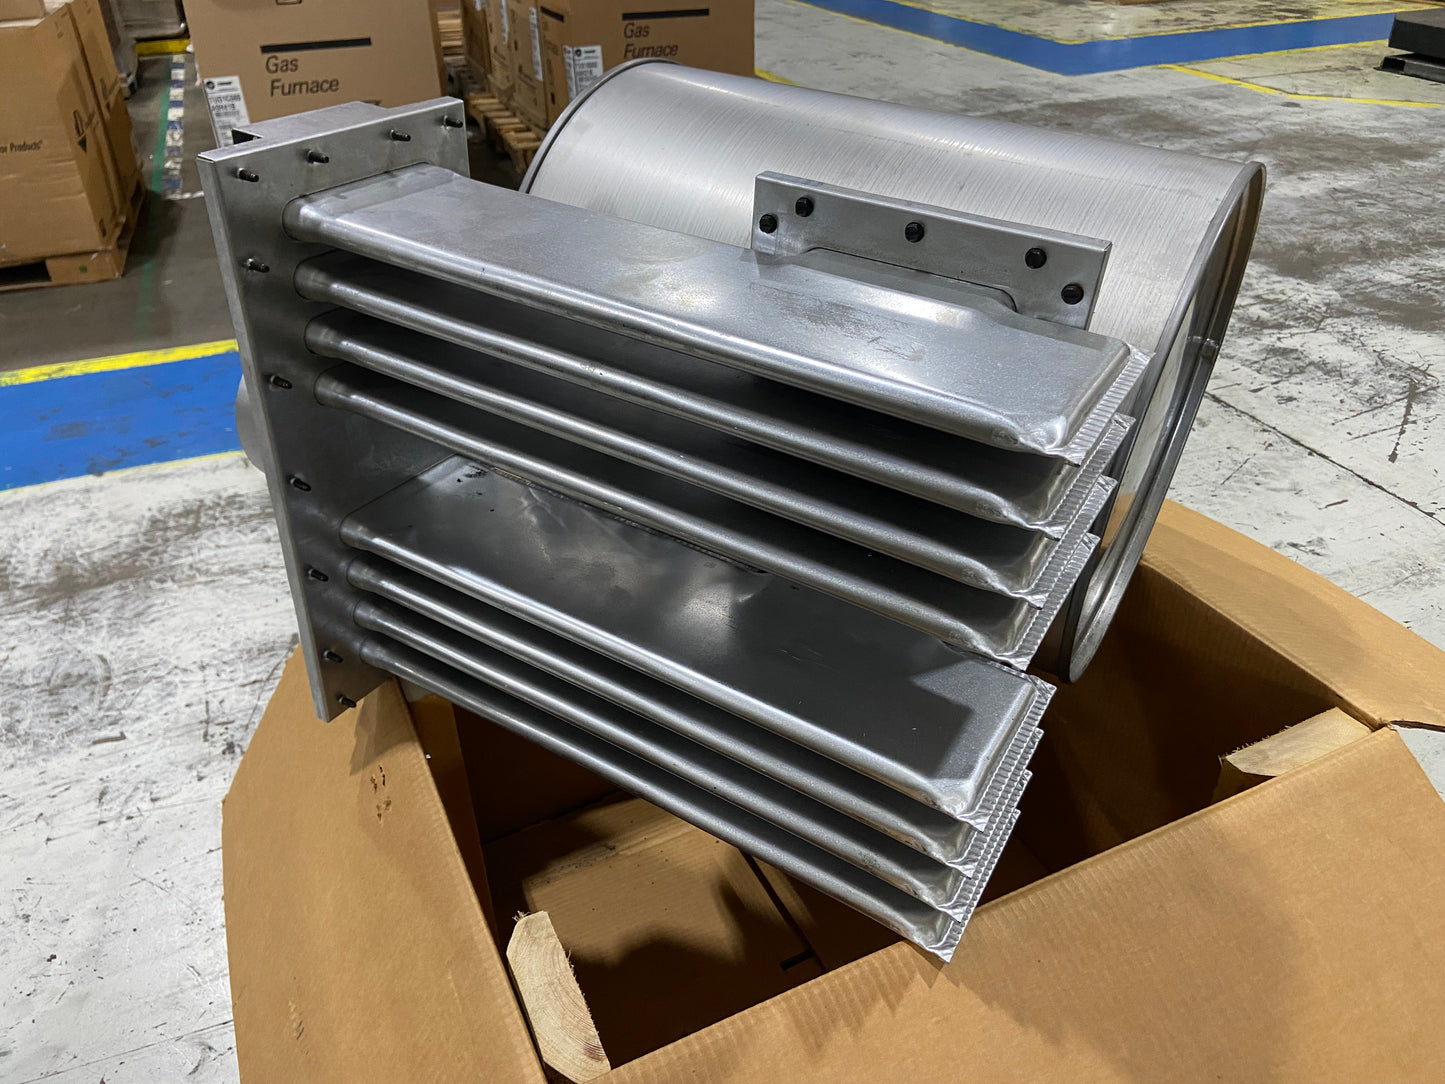 2 SECTION HEAT EXCHANGER ASSEMBLY FOR RESIDENTIAL OIL BURNERS